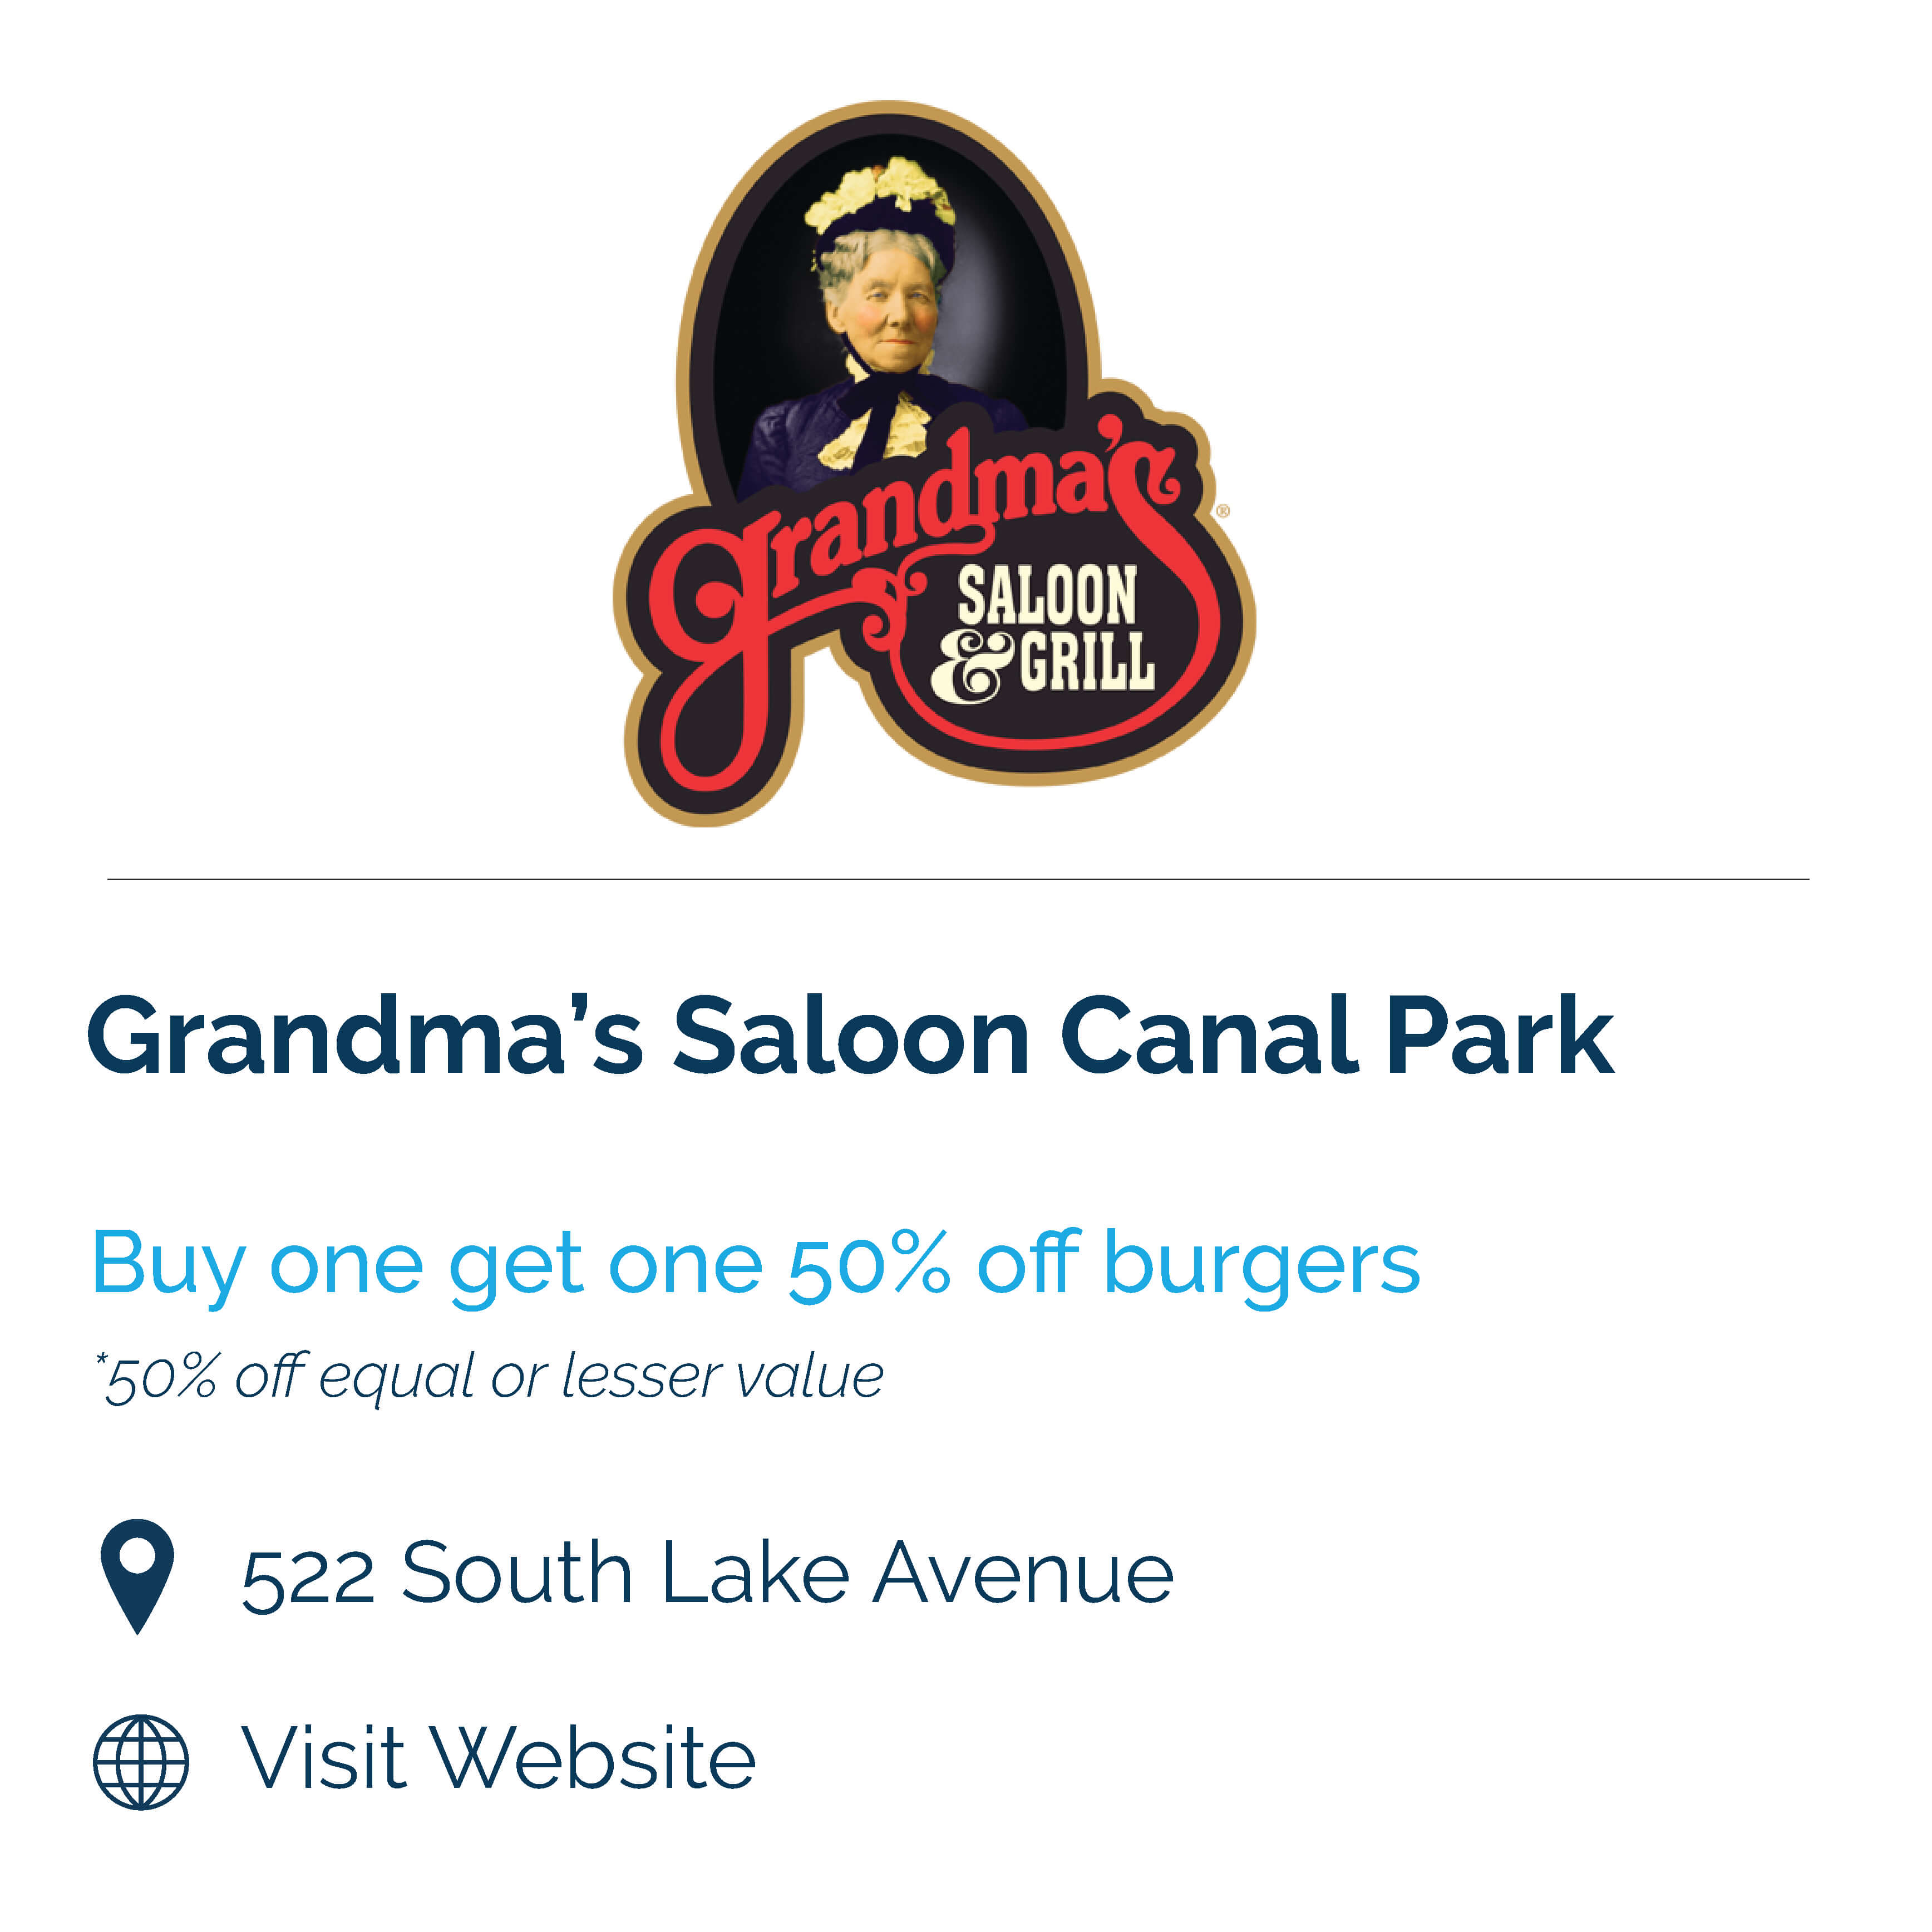 grandmas saloon canal park. buy one get one 50% off burgers. 50% off equal or lesser value. 522 south lake avenue.